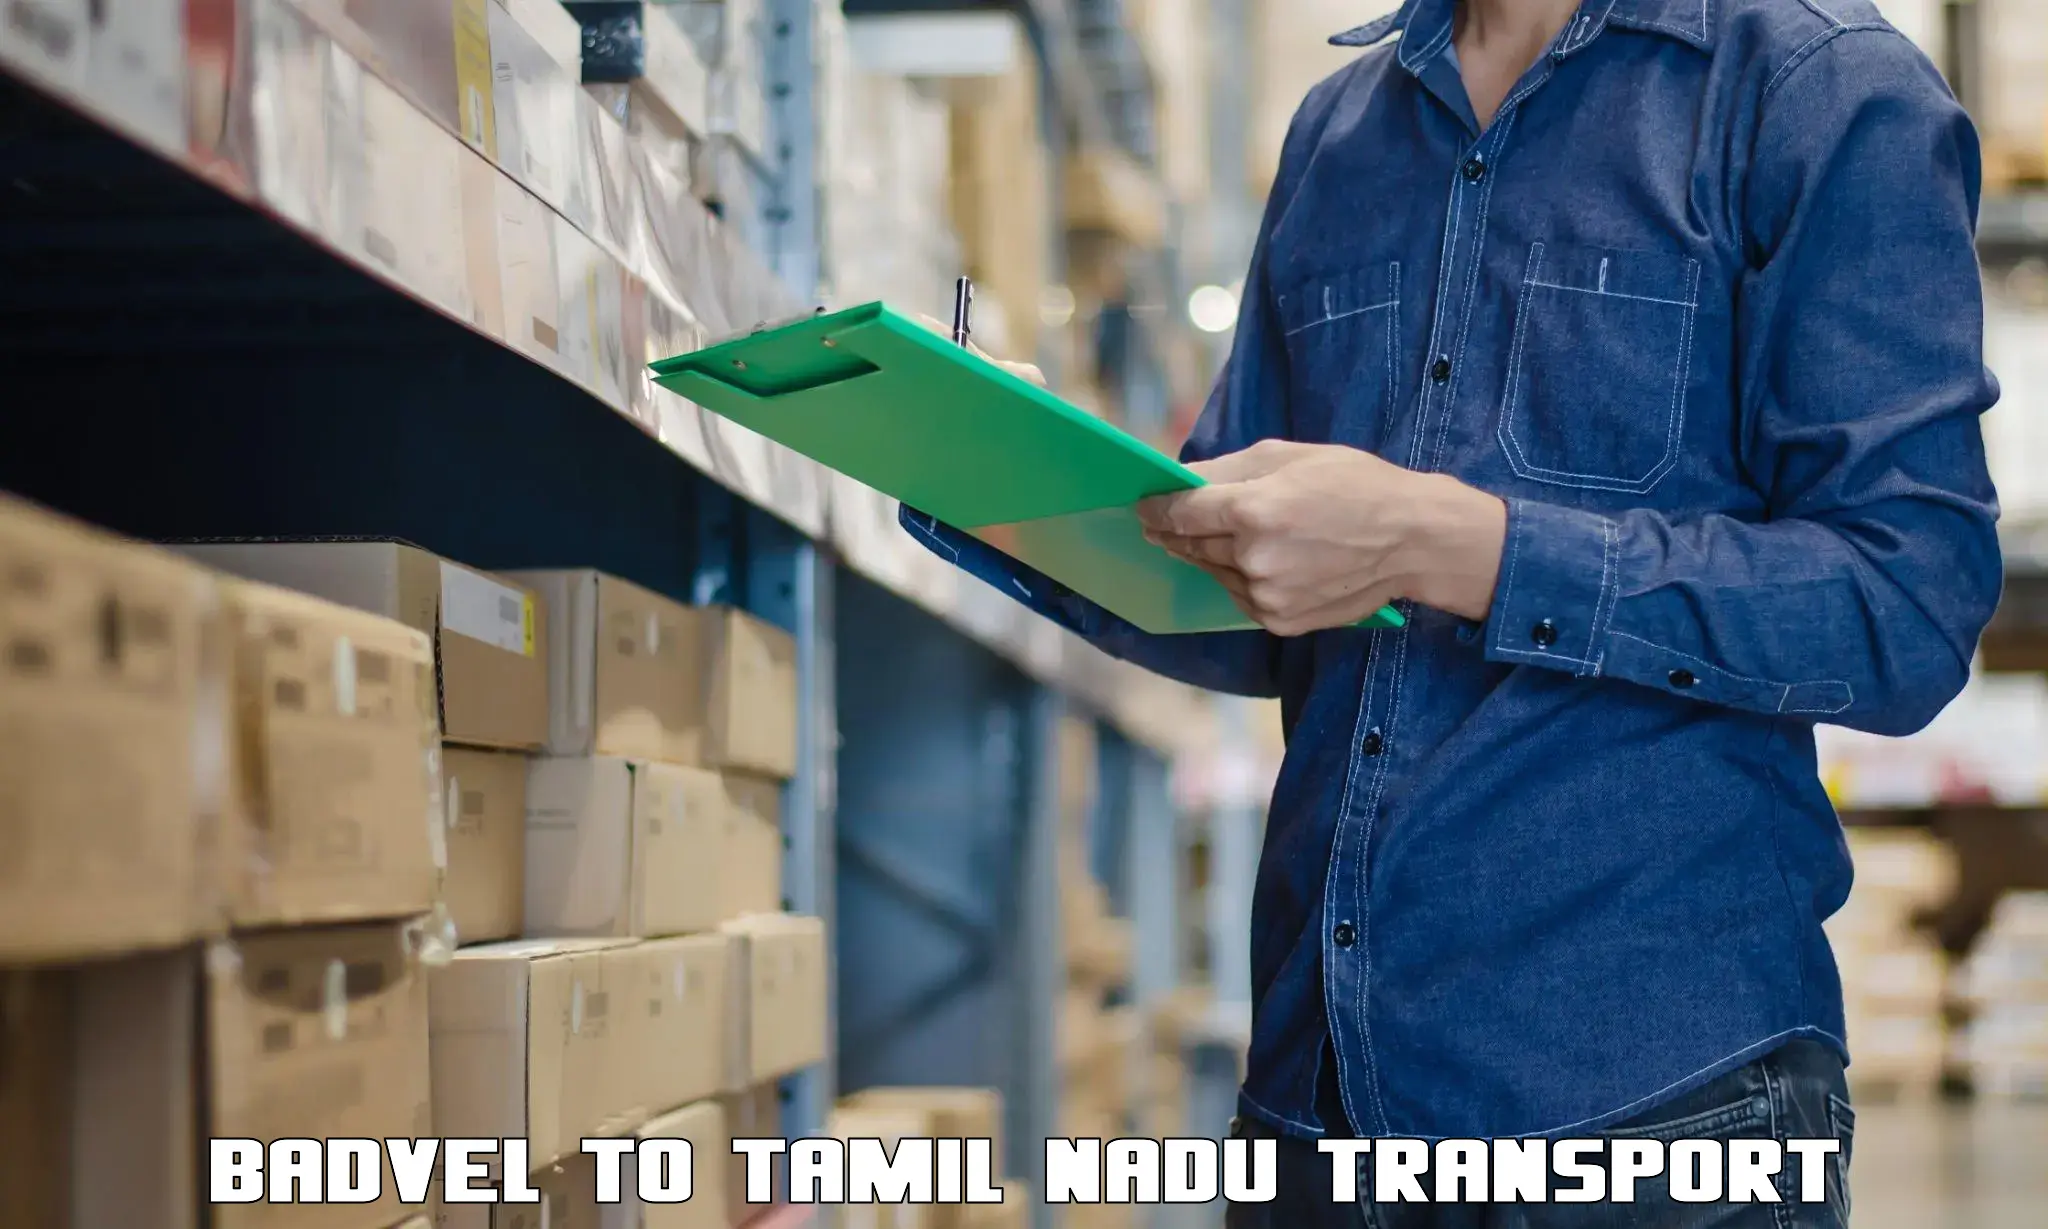 Truck transport companies in India in Badvel to Saveetha Institute of Medical and Technical Sciences Chennai